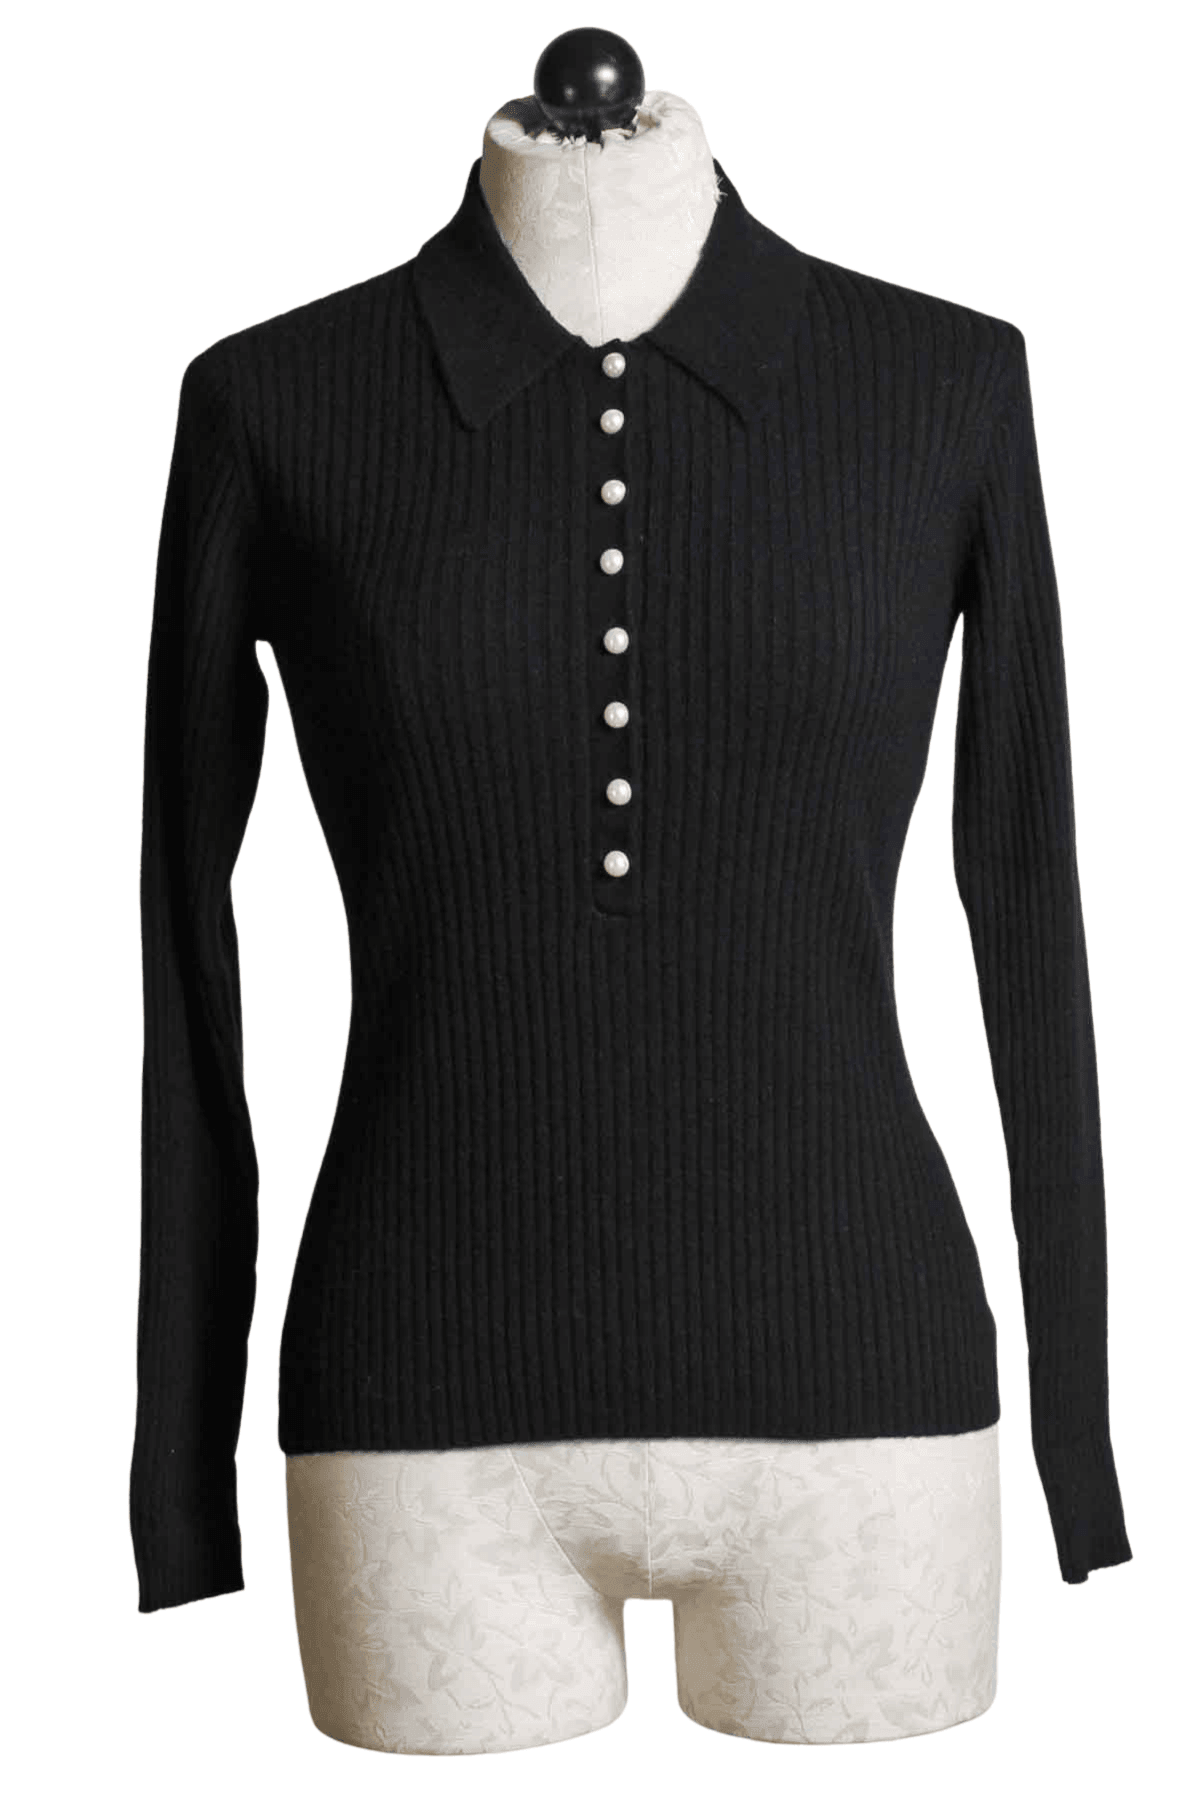 Fine Ribbed Evie Polo Sweater by Generation Love in black with Pearl Buttons